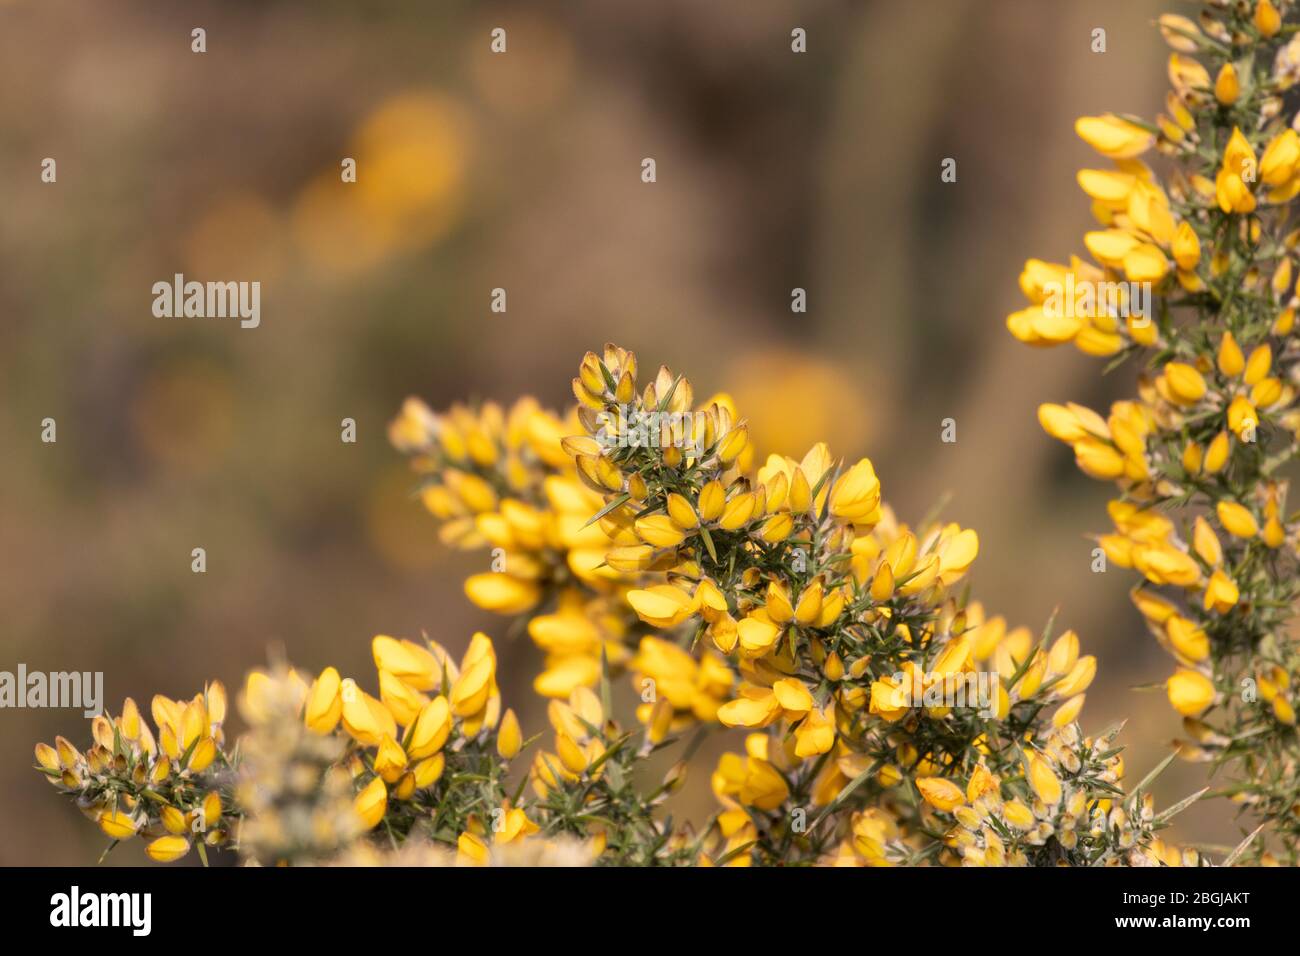 Vibrant yellow gorse flowers in the spring sunshine Stock Photo